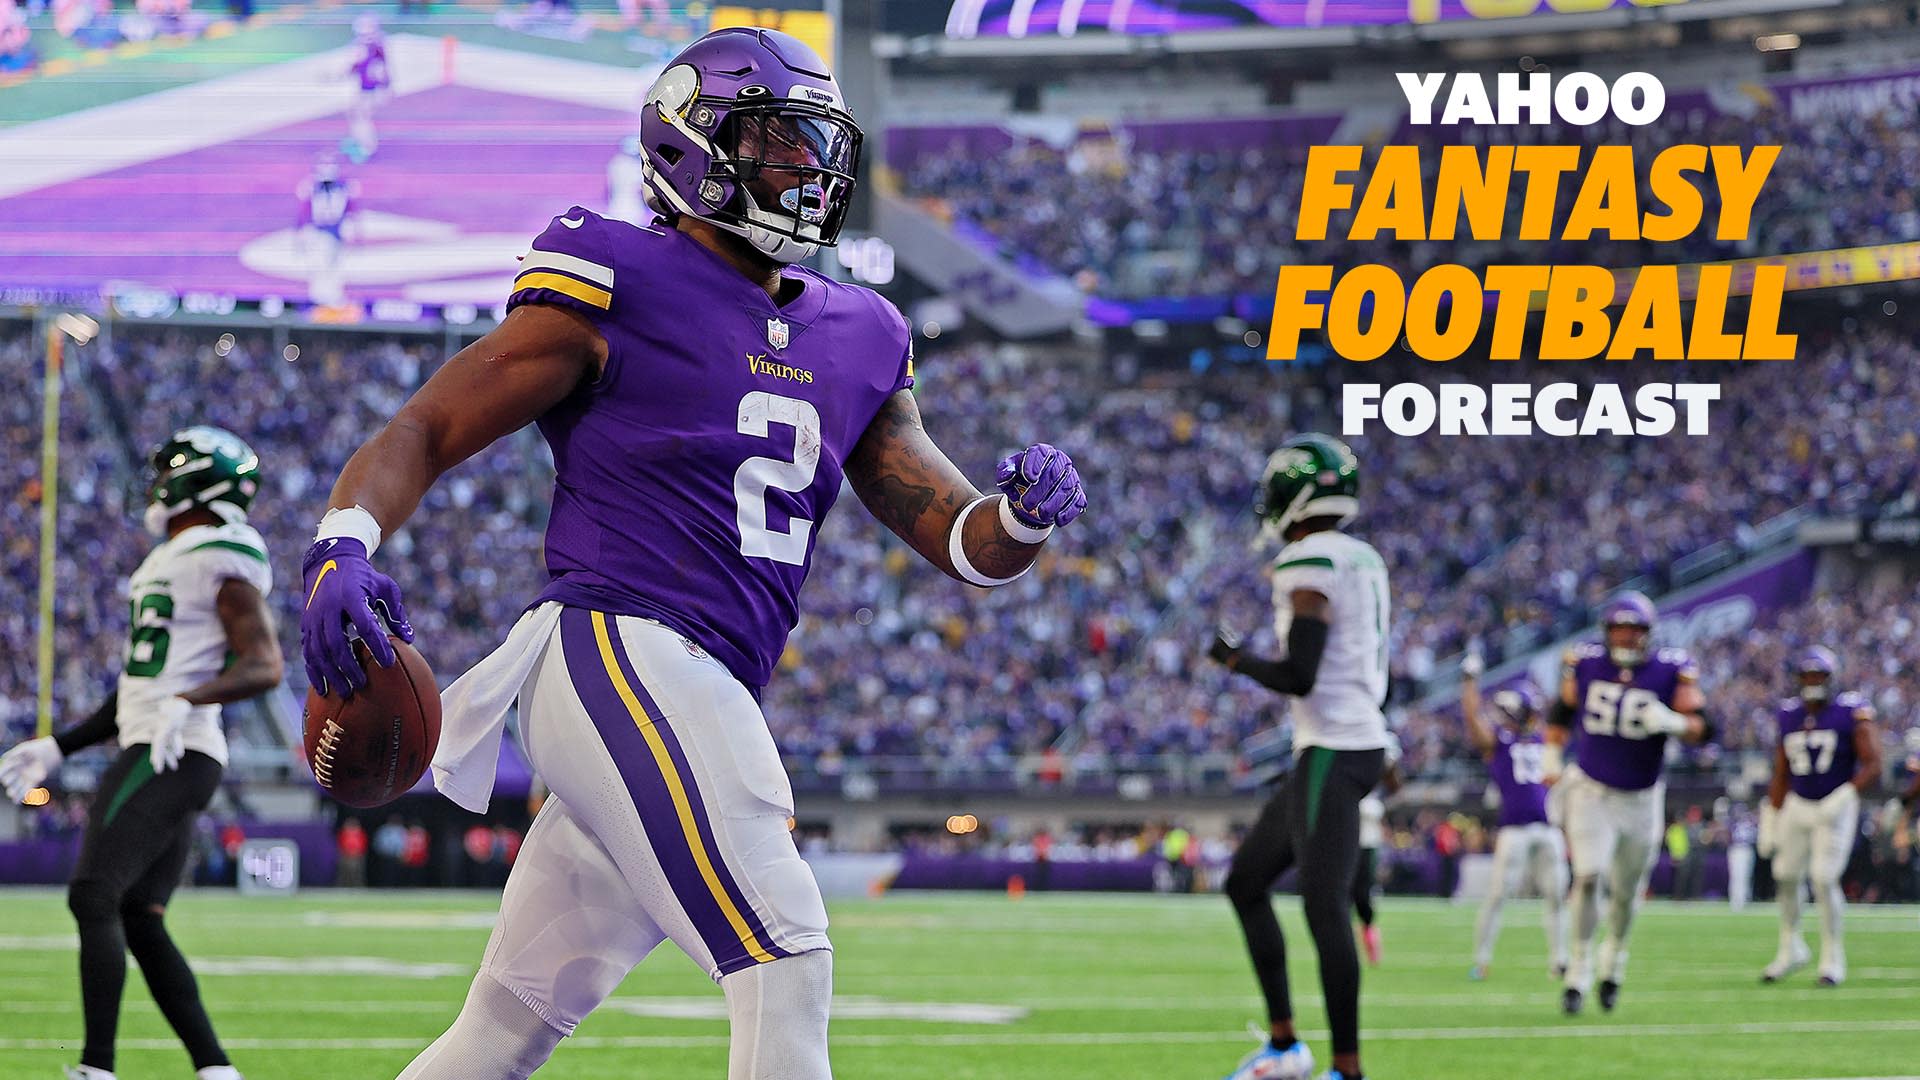 Alexander Mattison knew he would be RB1 in Minnesota Yahoo Fantasy Football Forecast